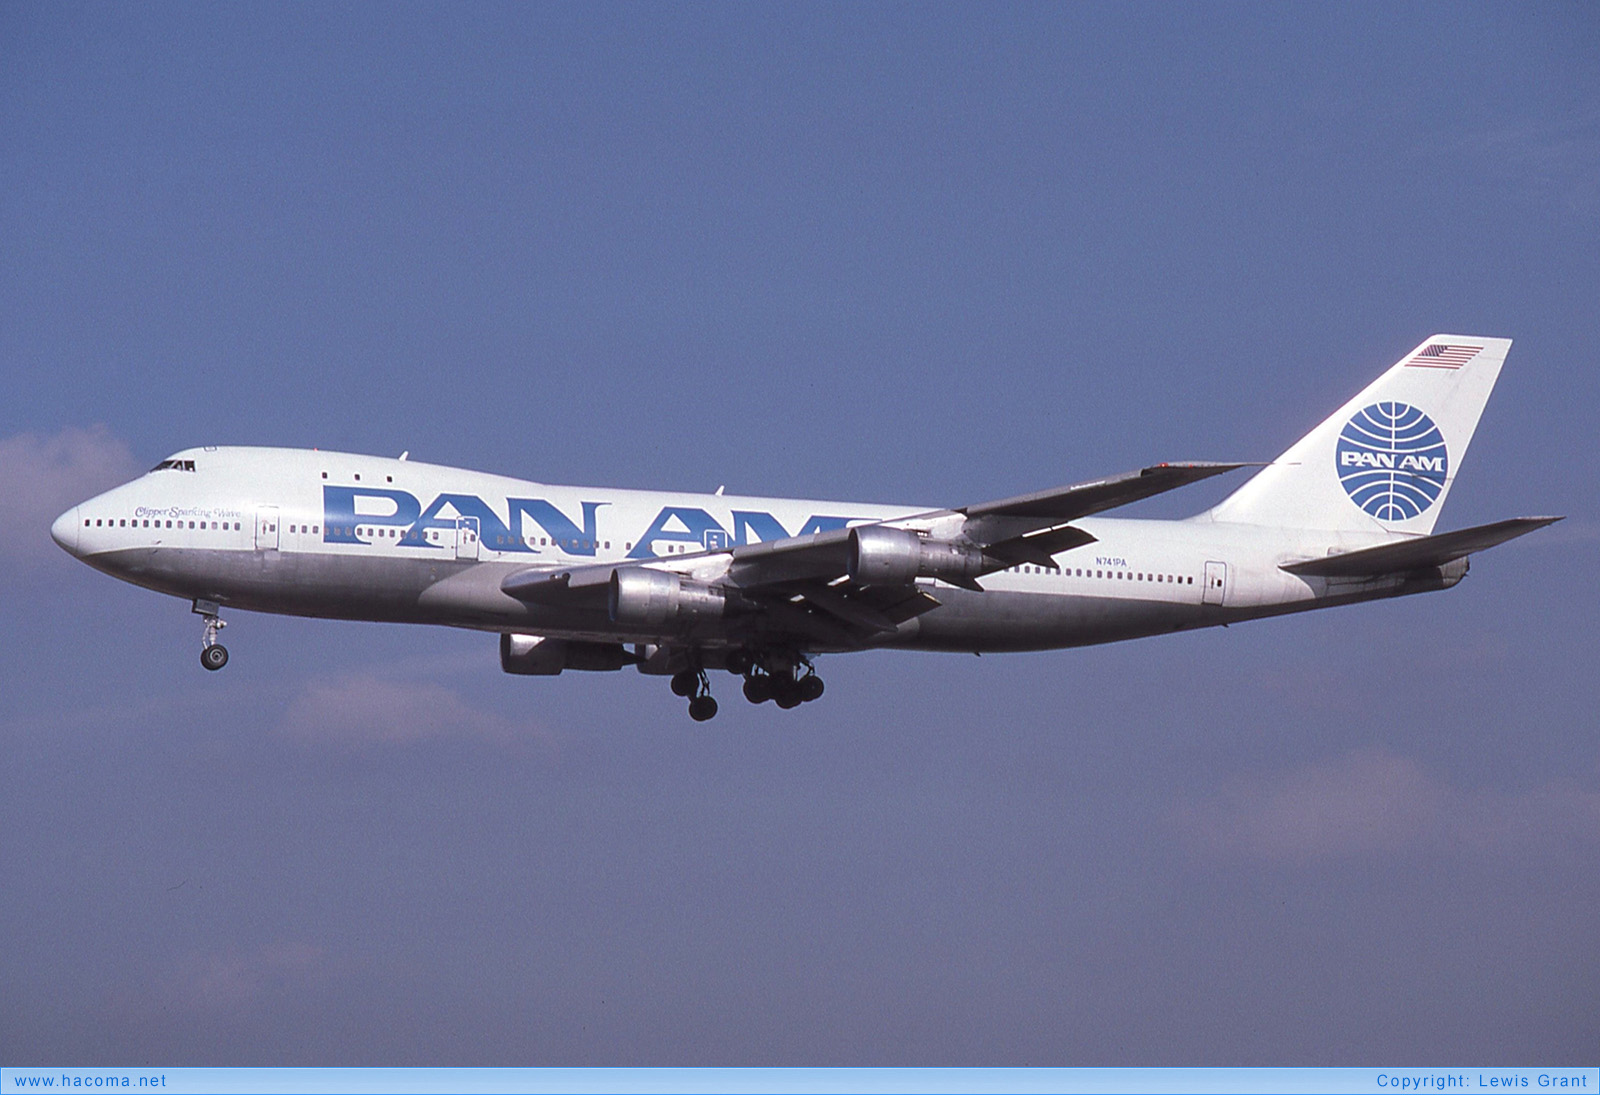 Foto von N741PA - Pan Am Clipper Kit Carson / Sparking Wave / Special Olympian - London Heathrow Airport - 08.03.1986